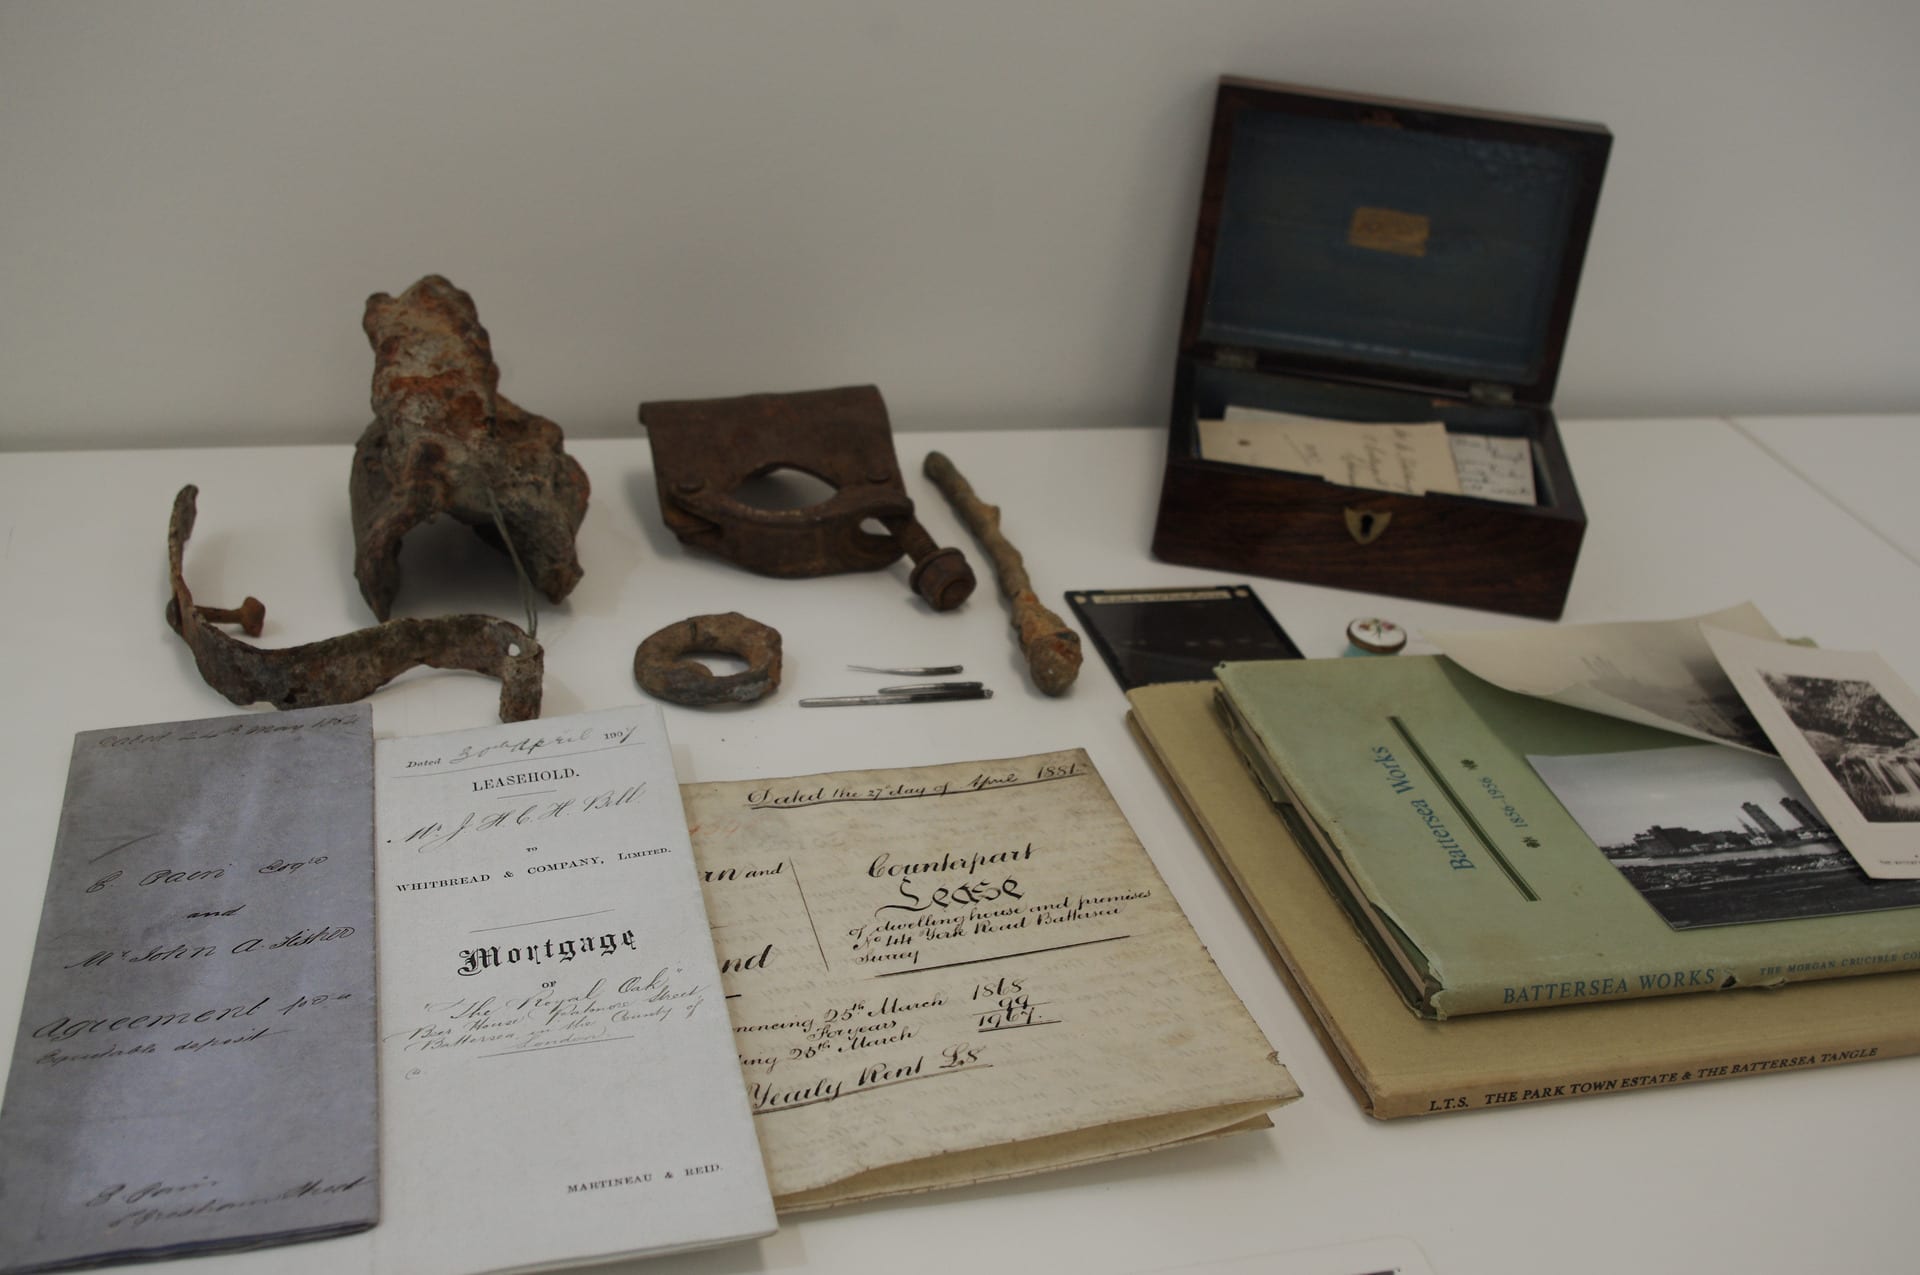 Research: found objects, photographs, documents